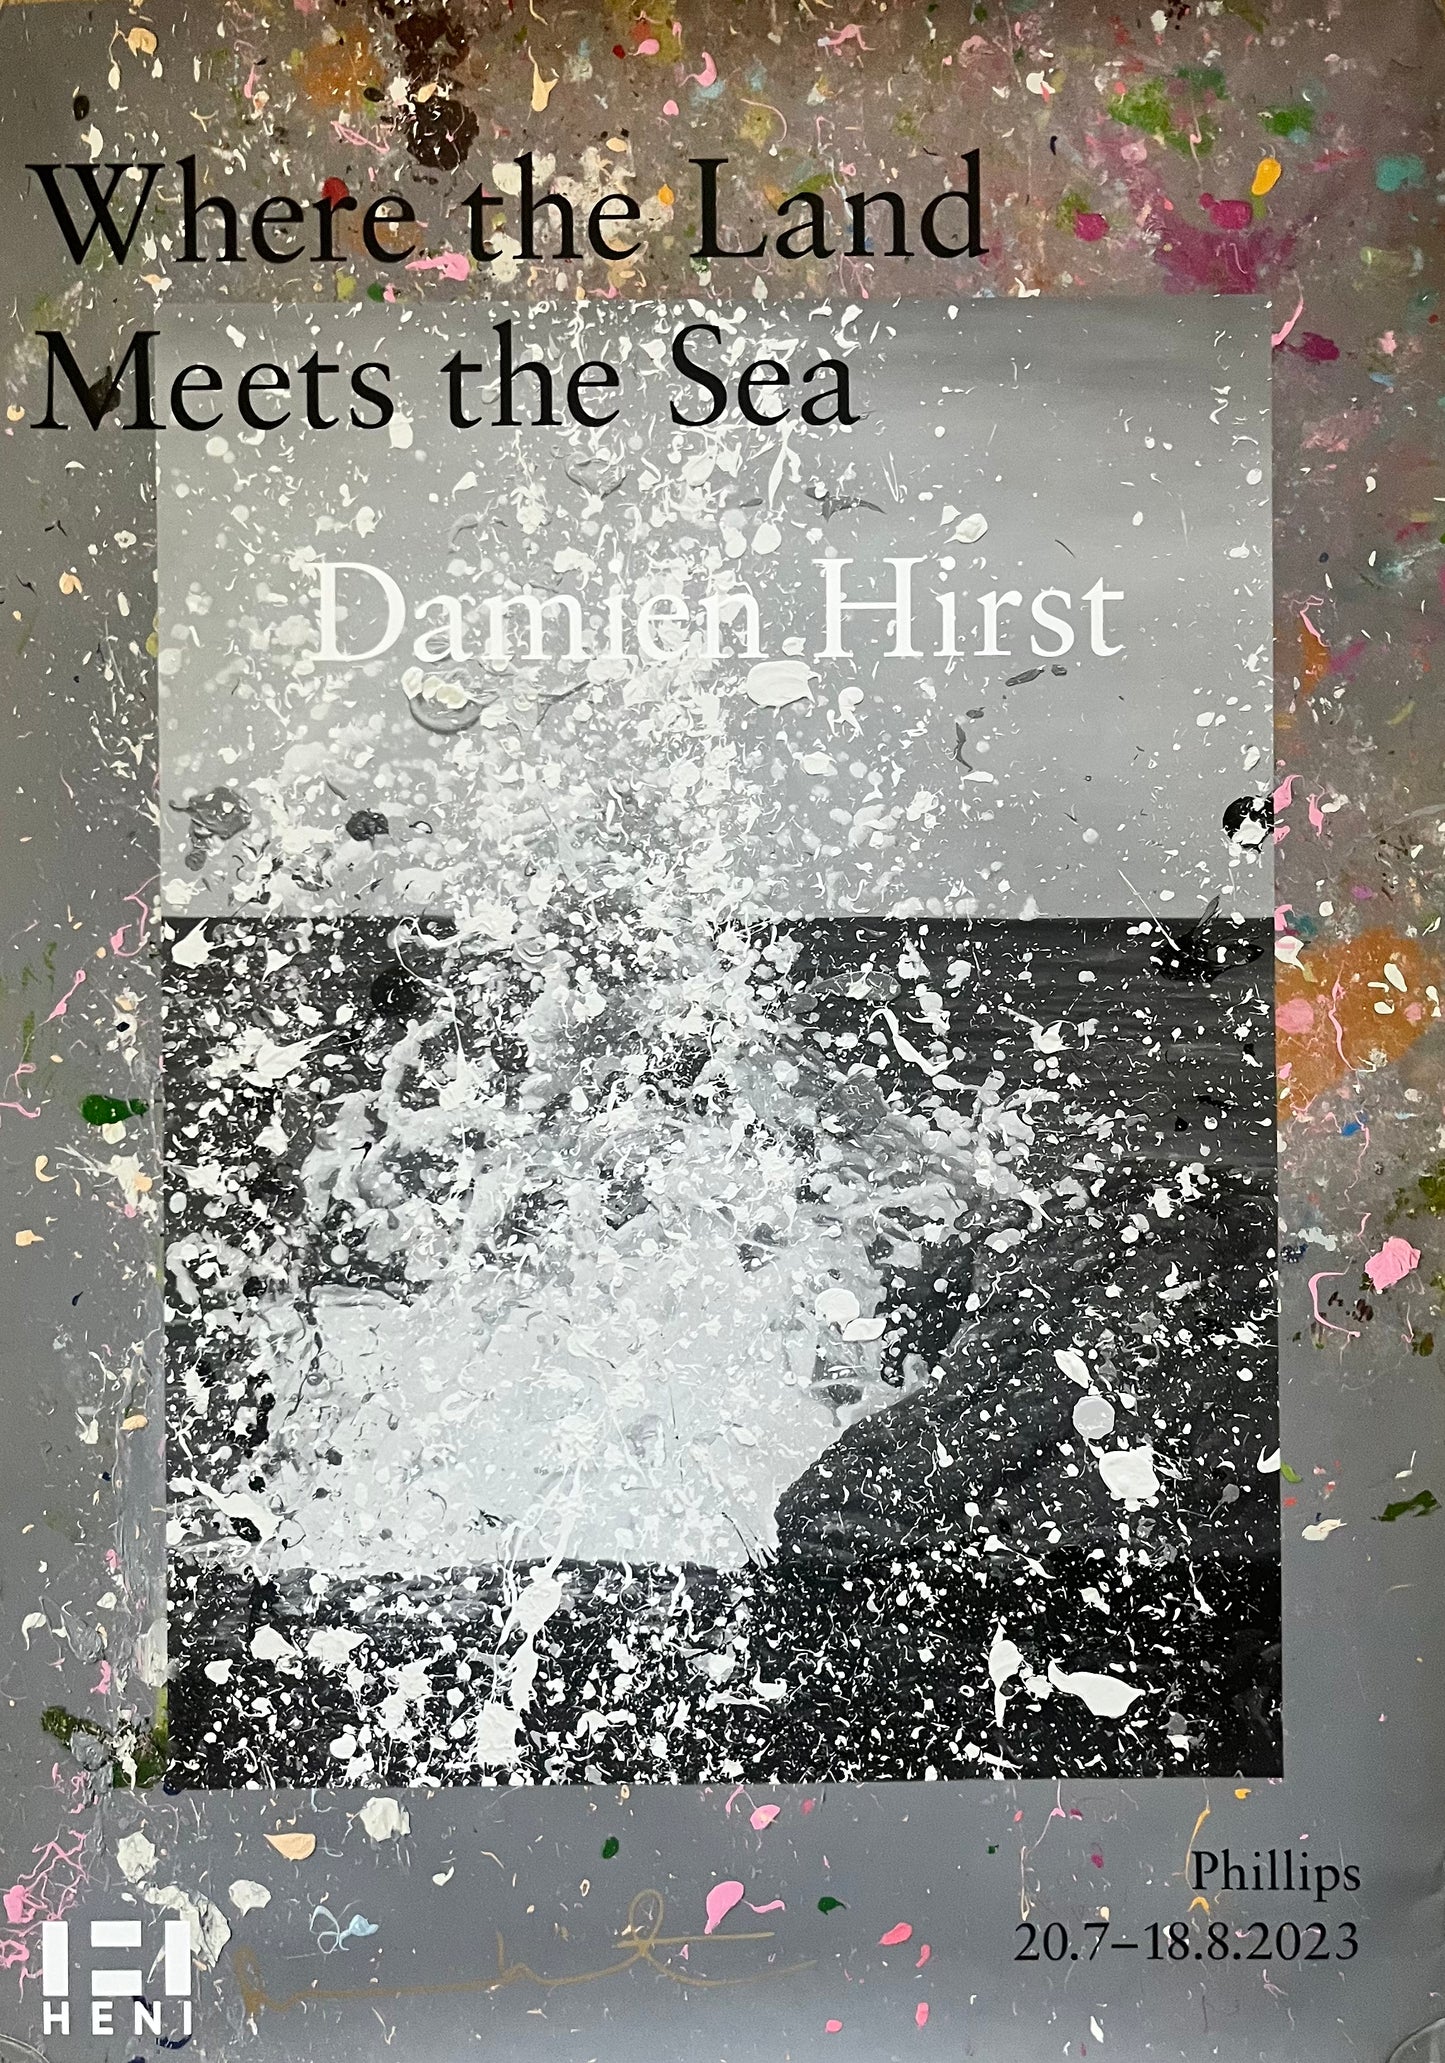 Damien Hirst, handsignierte Lithographie „When the Land Meets the Sea“